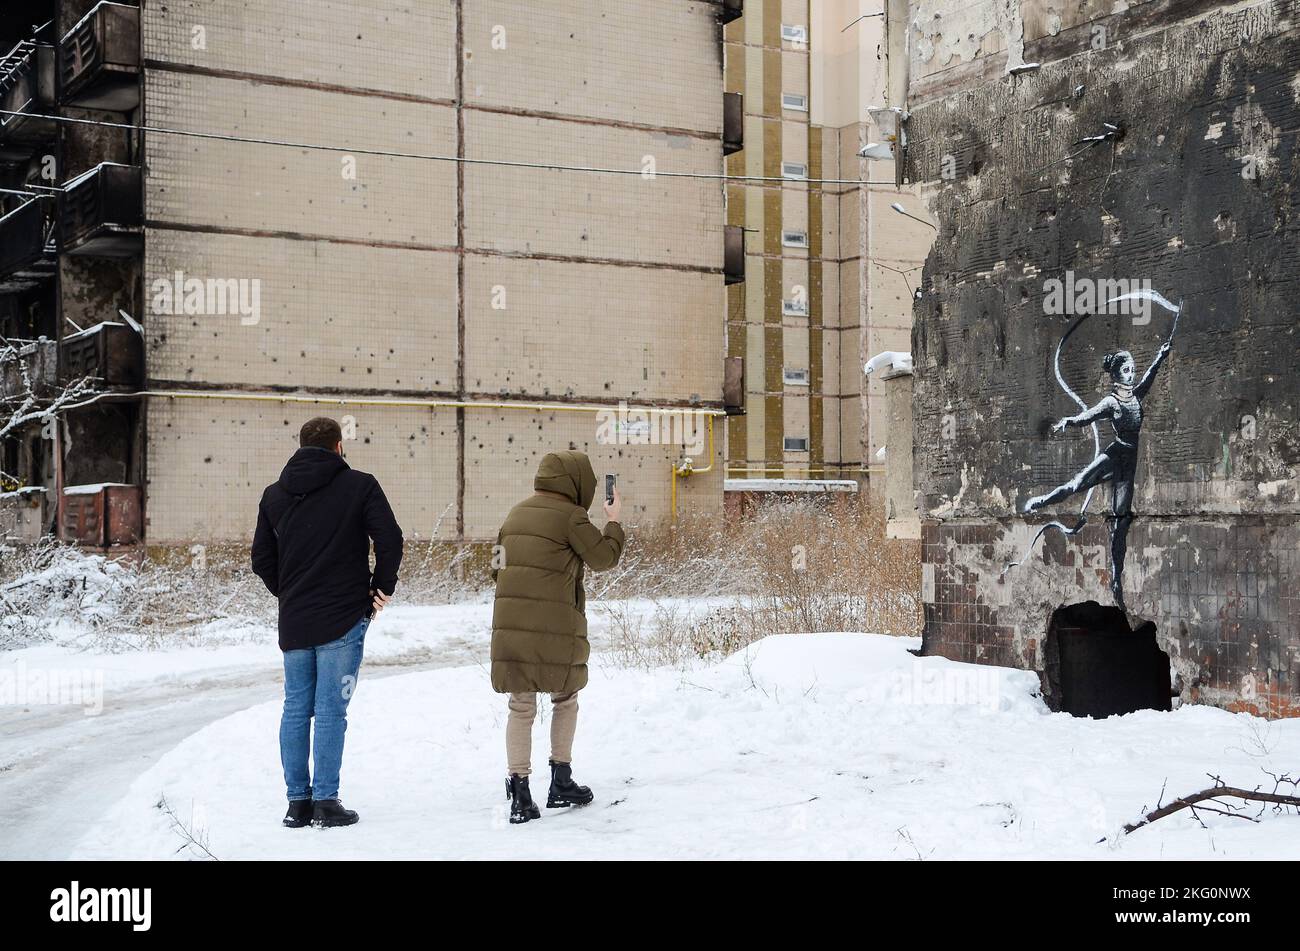 IRPIN, UKRAINE - NOVEMBER 19, 2022 - A woman takes a picture of the mural created by England-based street artist Banksy on the wall of the apartment b Stock Photo